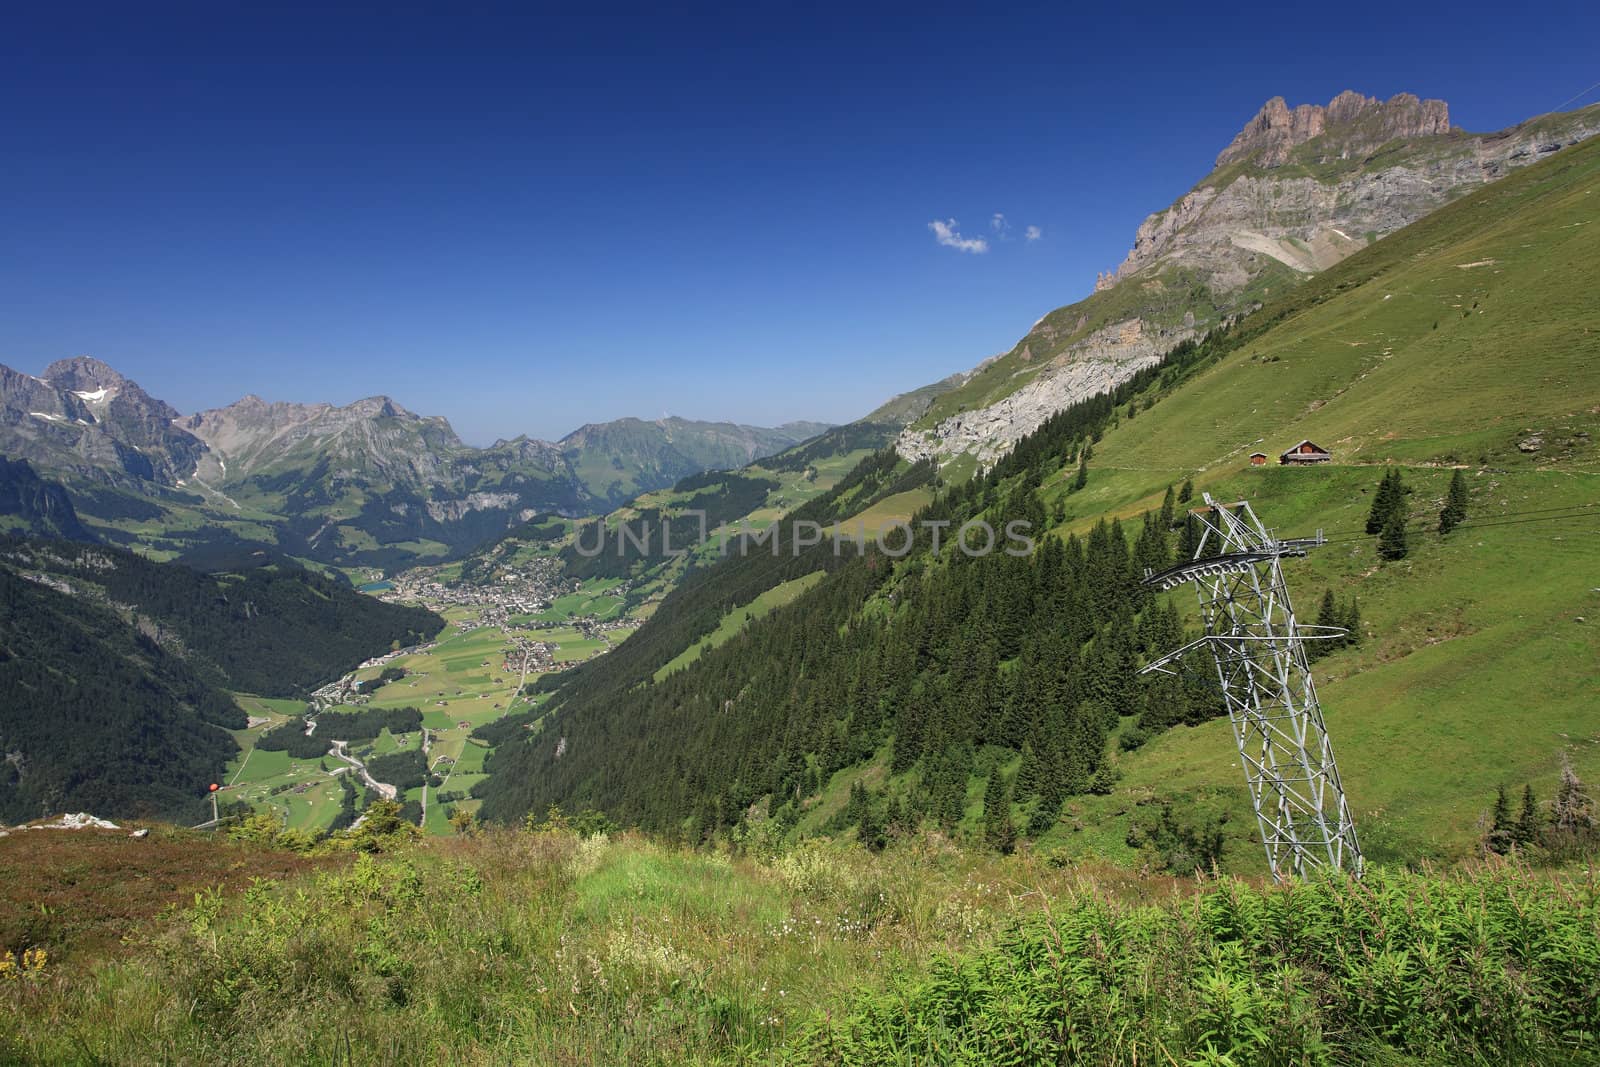 Looking down at Engelberg from Fuerenalp by sumners